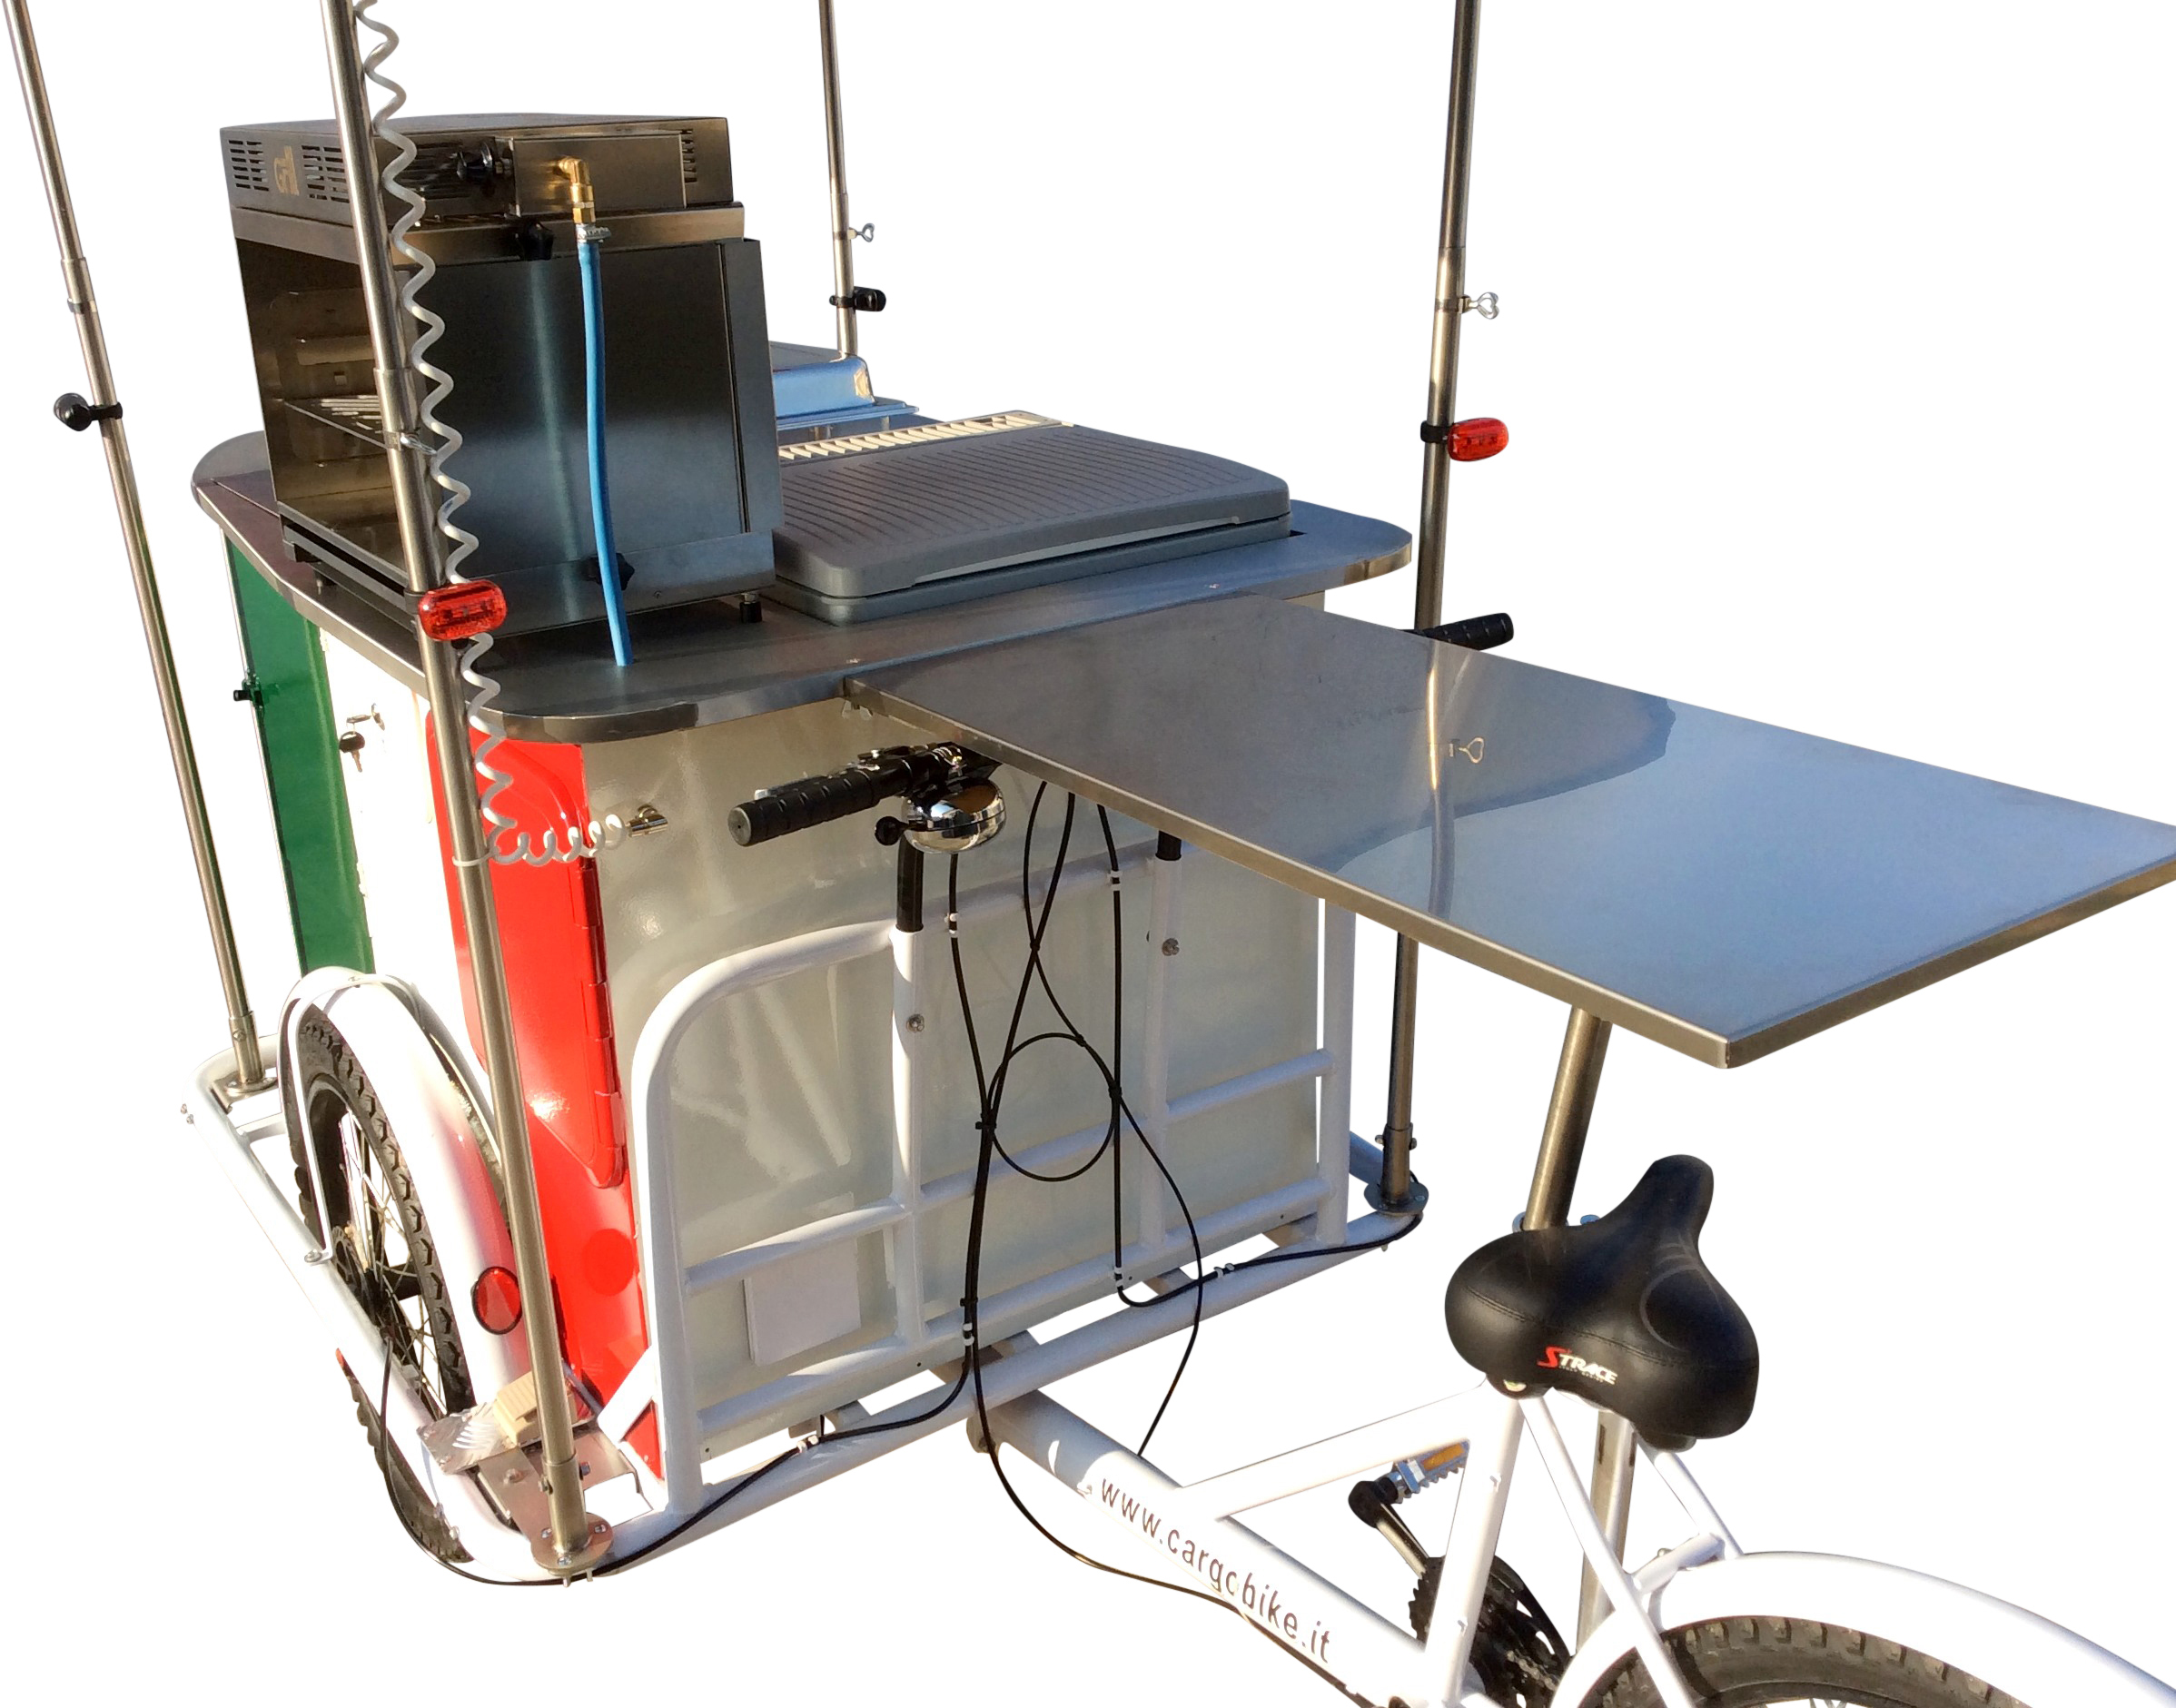 STREET_FOOD_GRILL_REVIVAL_TRICICLO_CARGO_BIKE_23